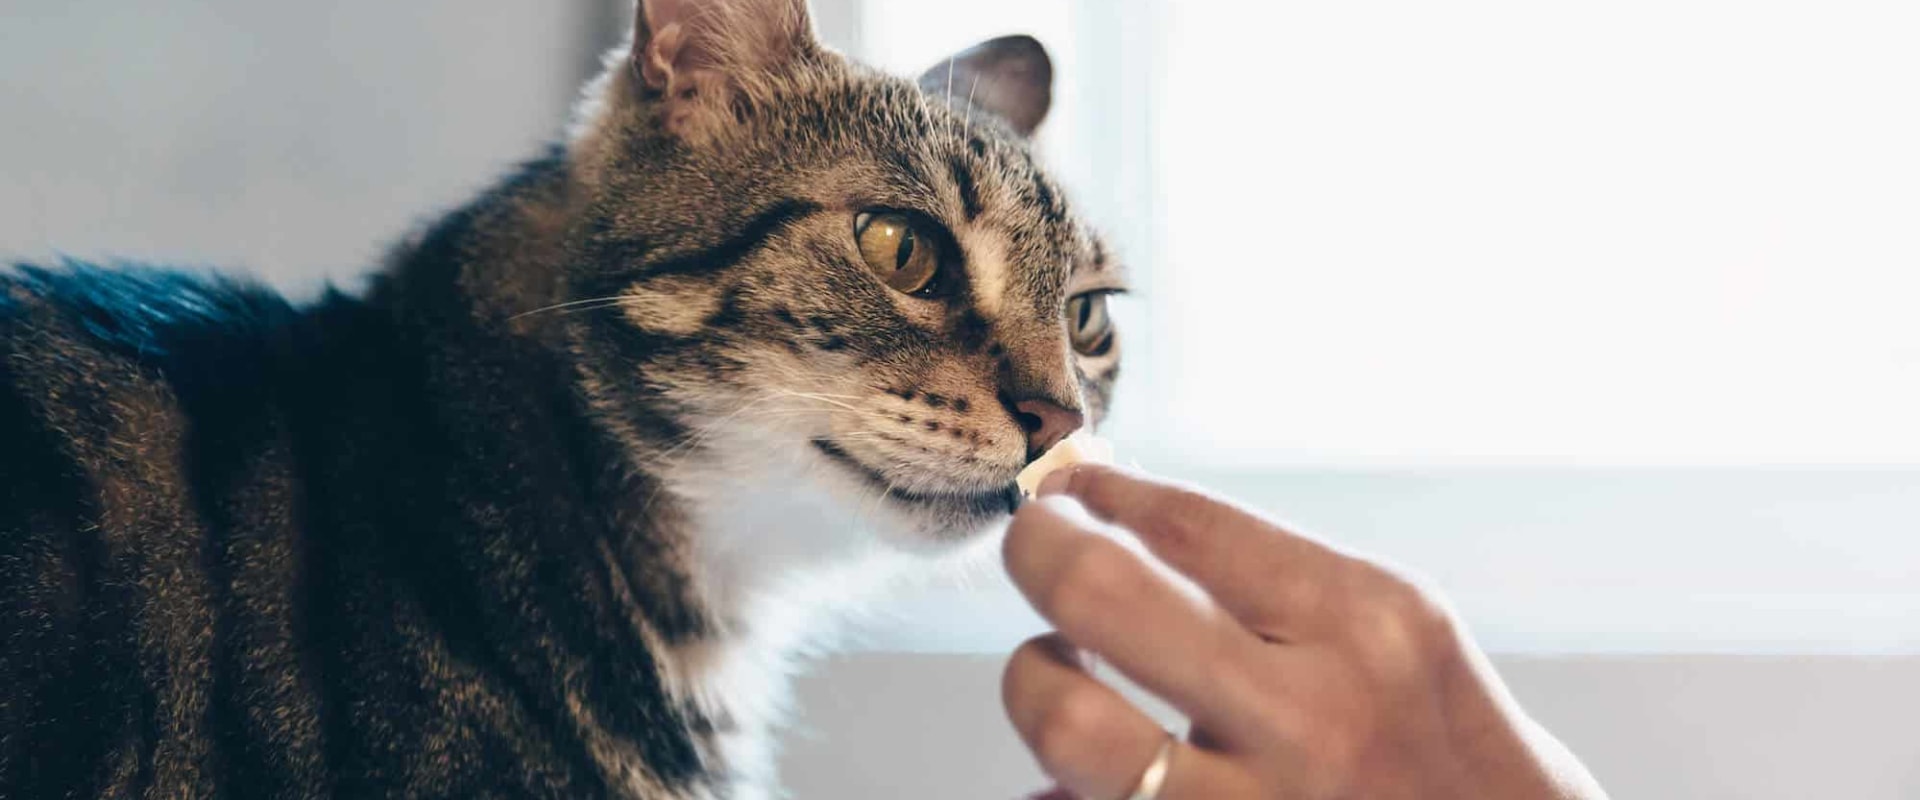 Vitamin and Mineral Requirements for Cats